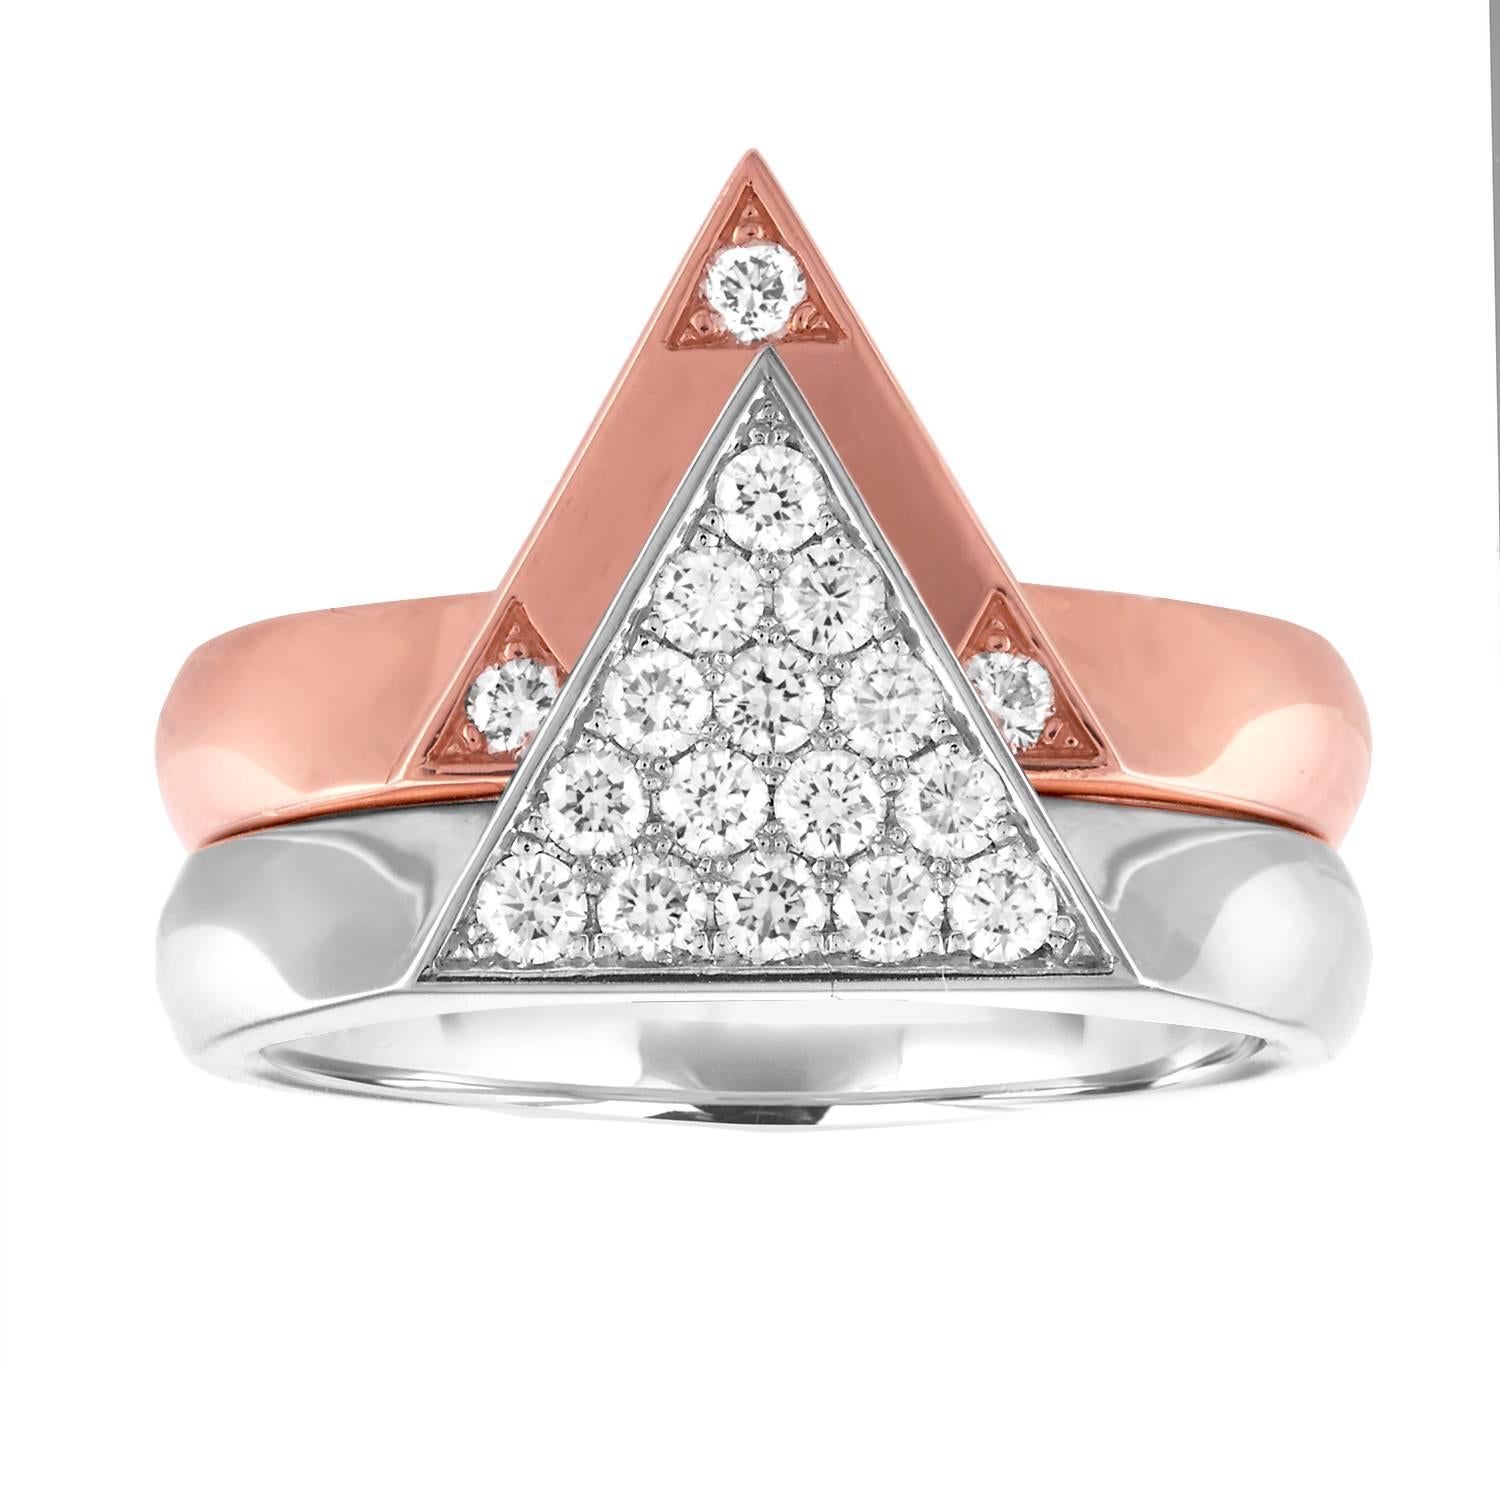 Very Unusual and Modern Star of David Ring
The ring is 14K White And Rose Gold
There are 0.55 Carats in Diamonds F VS
The ring can be worn as a 